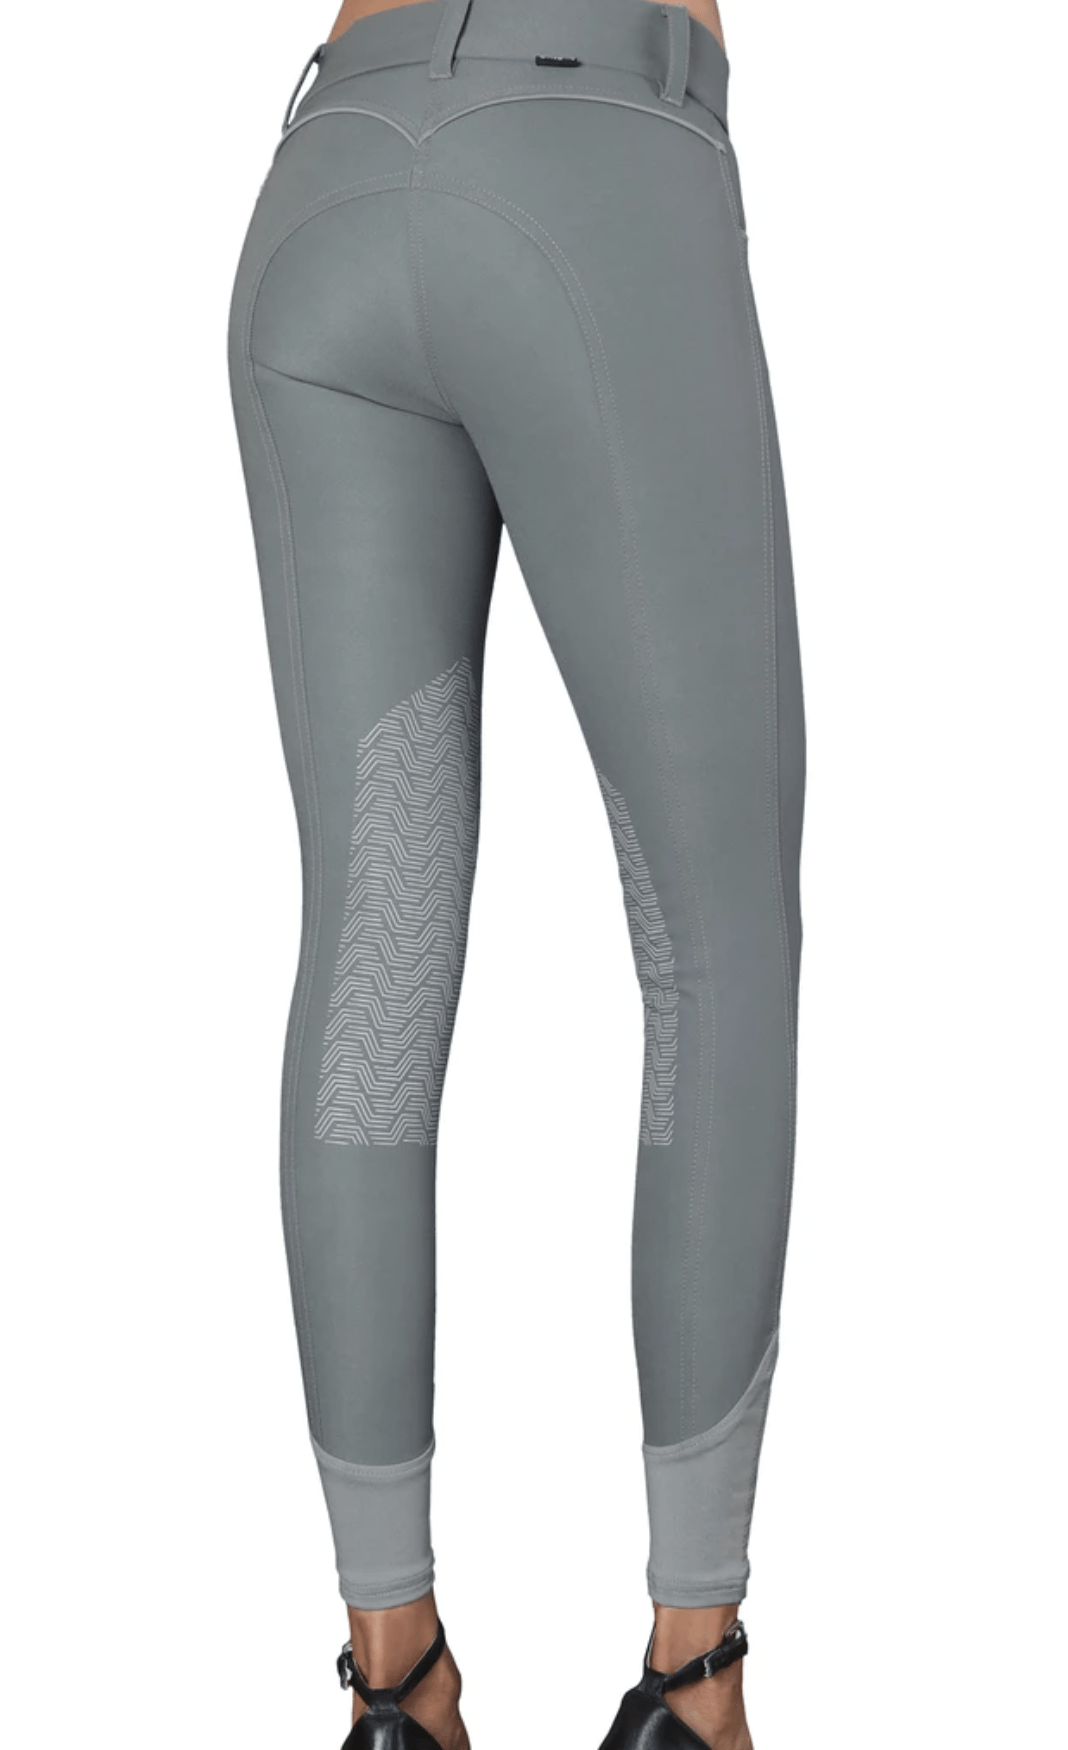 GhoDho Breeches GhoDho Elara Breeches - Sage equestrian team apparel online tack store mobile tack store custom farm apparel custom show stable clothing equestrian lifestyle horse show clothing riding clothes horses equestrian tack store